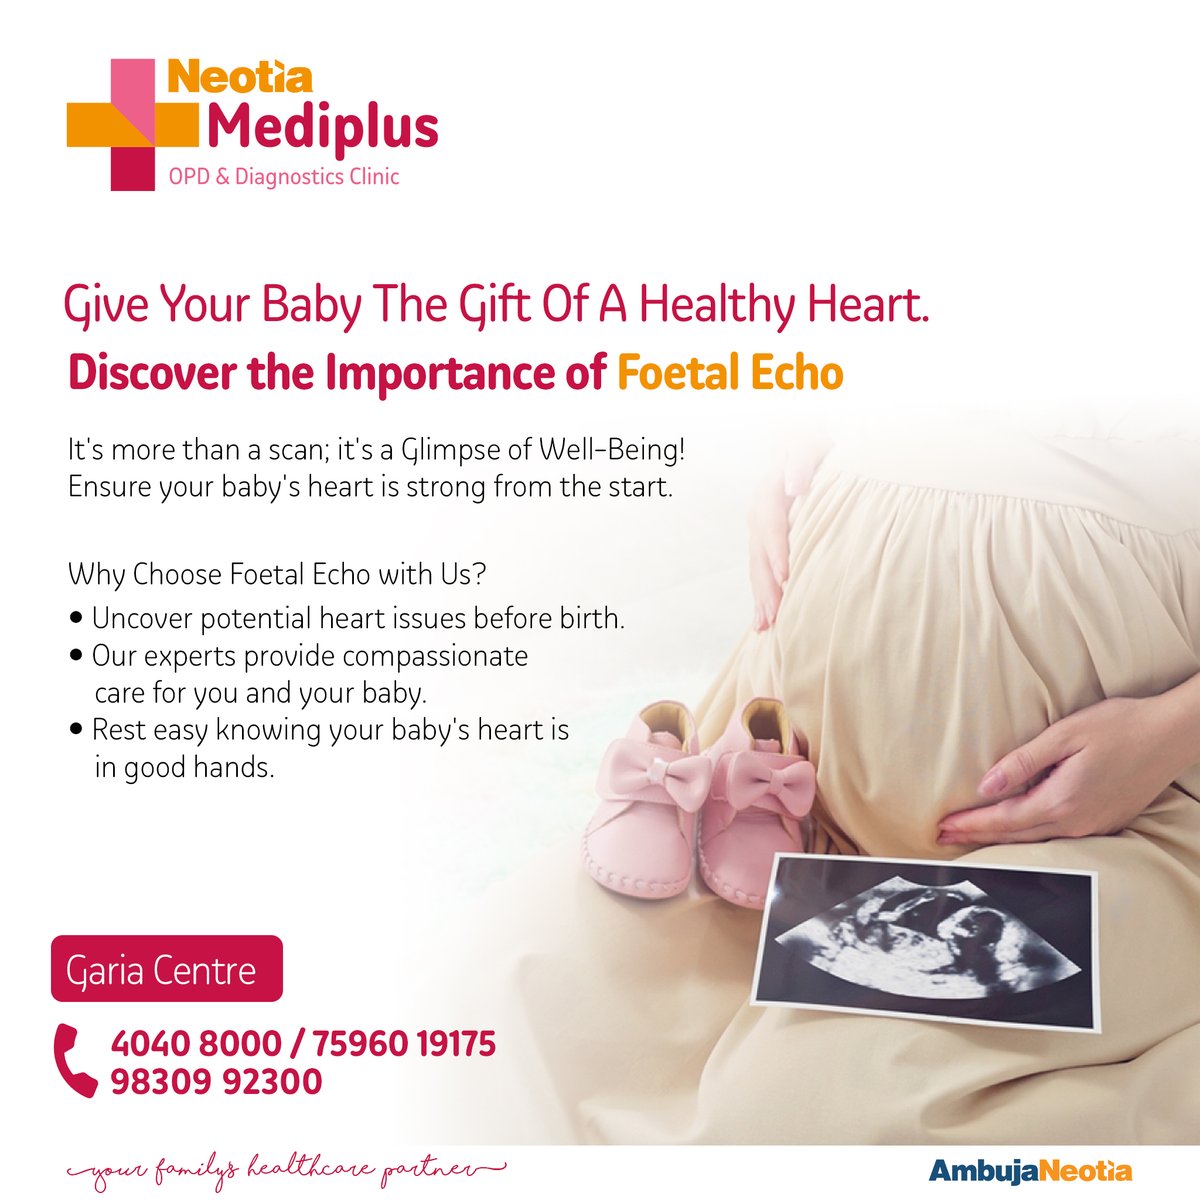 Listen to the rhythm of care! Our Foetal Echo service at #NeotiaMediplus Clinic ensures your baby's heart health with advanced screenings. 1 in 100 babies are born with heart defects - early detection is key. Book your Appointment. #FoetalEcho #HeartHealth #PregnancyCare